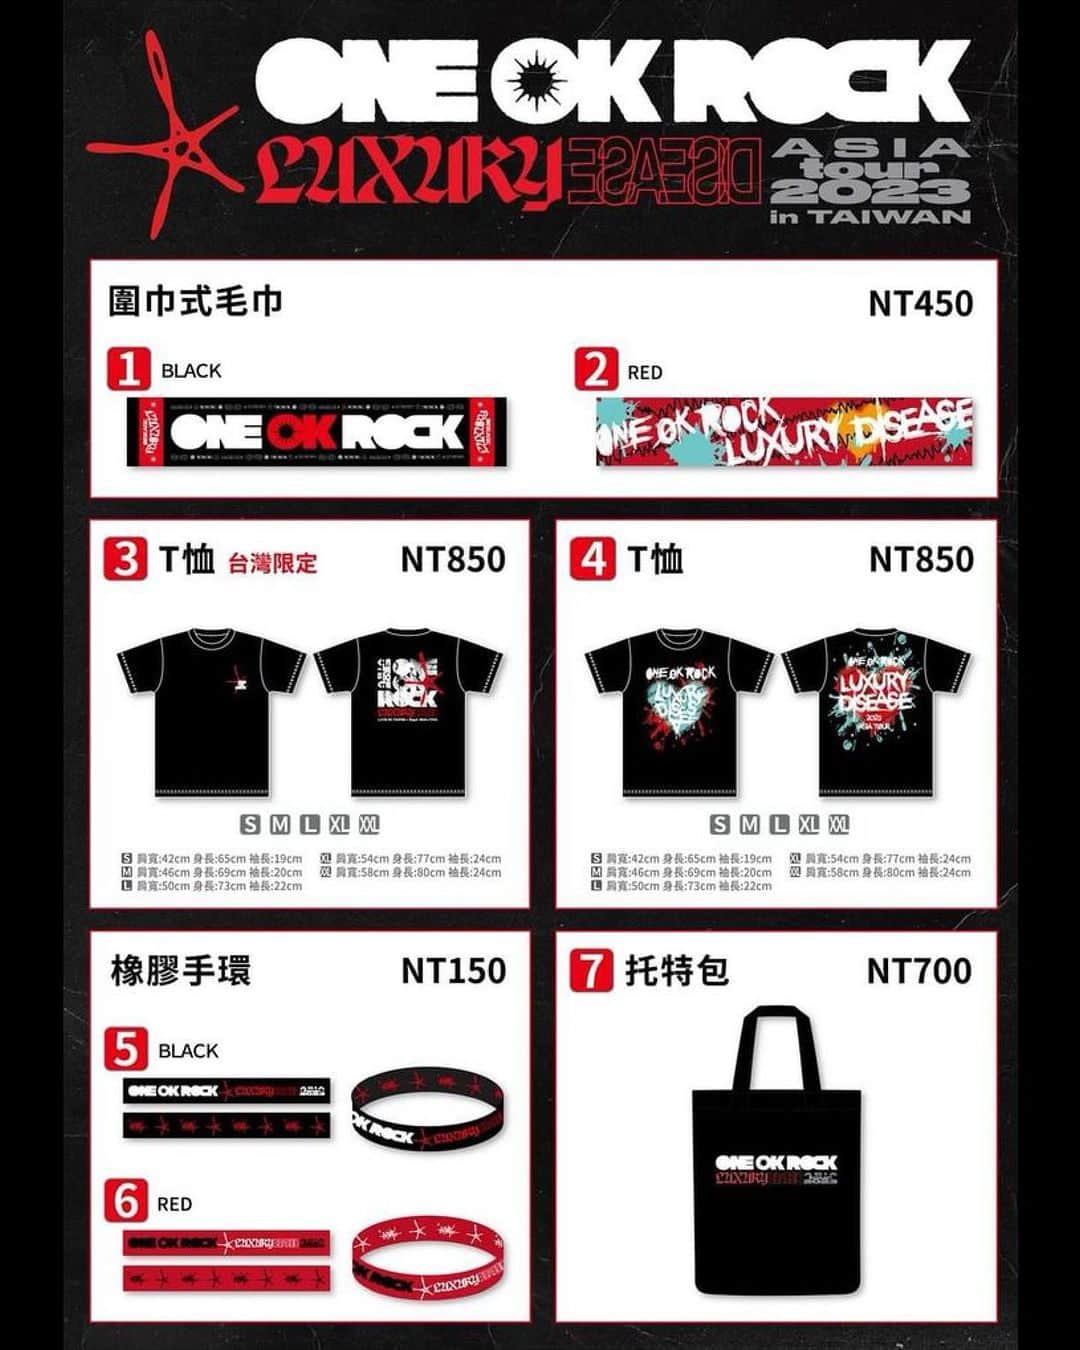 ONE OK ROCK WORLDのインスタグラム：「- 【ONE OK ROCK Luxury Disease Asia Tour 2023 in TAIWAN】  Details of merchandise for Taiwan live! 🎶Save your money to buy the merchandise.   ◎Sales timing   Sept. 16(Sat) 10:00-21:00 Sept. 17(Sun) 10:00-21:00  ※May change accordingly to actual day situation.   ◎Sales venue Nankō tenji-kan 1-kai kitamon Nangang Exhibition Hall 1 North Gate   ◎Things to note  ※ Only cash accepted for payment.  You can purchase the merchandise with or without a ticket.   ◎The timing of the sales of merchandise may change depending on the actual day situation. ※ Merchandise will still be on sale even after the concert.  ◎During check out, please do check your change, item's quantity, size etc, at the counter. Only exchange/return of damaged goods are accepted. Any other reasons will not be accepted.   ◎ If you find your item is damaged, please look for the staffs on that day for help.  To prevent confusion on site and causing any inconvenience to neighboring patrons and other events, please follow the instructions of the staffs strictly for queuing.   ◎As we are going green, there will not be plastic bags provided. Please prepare your own eco-bags. ※ Photos are for illustration purposes only. The actual products may differ from the photos due to manufacturing factors. We seek your understanding.   ※ All items have limited quantity. It will be on sale until it's sold out. We seek your understanding. For more information, please follow Amuse Taiwan and check further details.  → https://www.facebook.com/amusetaiwan -  #oneokrockofficial #10969taka #toru_10969 #tomo_10969 #ryota_0809 #luxurydisease#luxurydiseaseasiatour2023#taiwan」